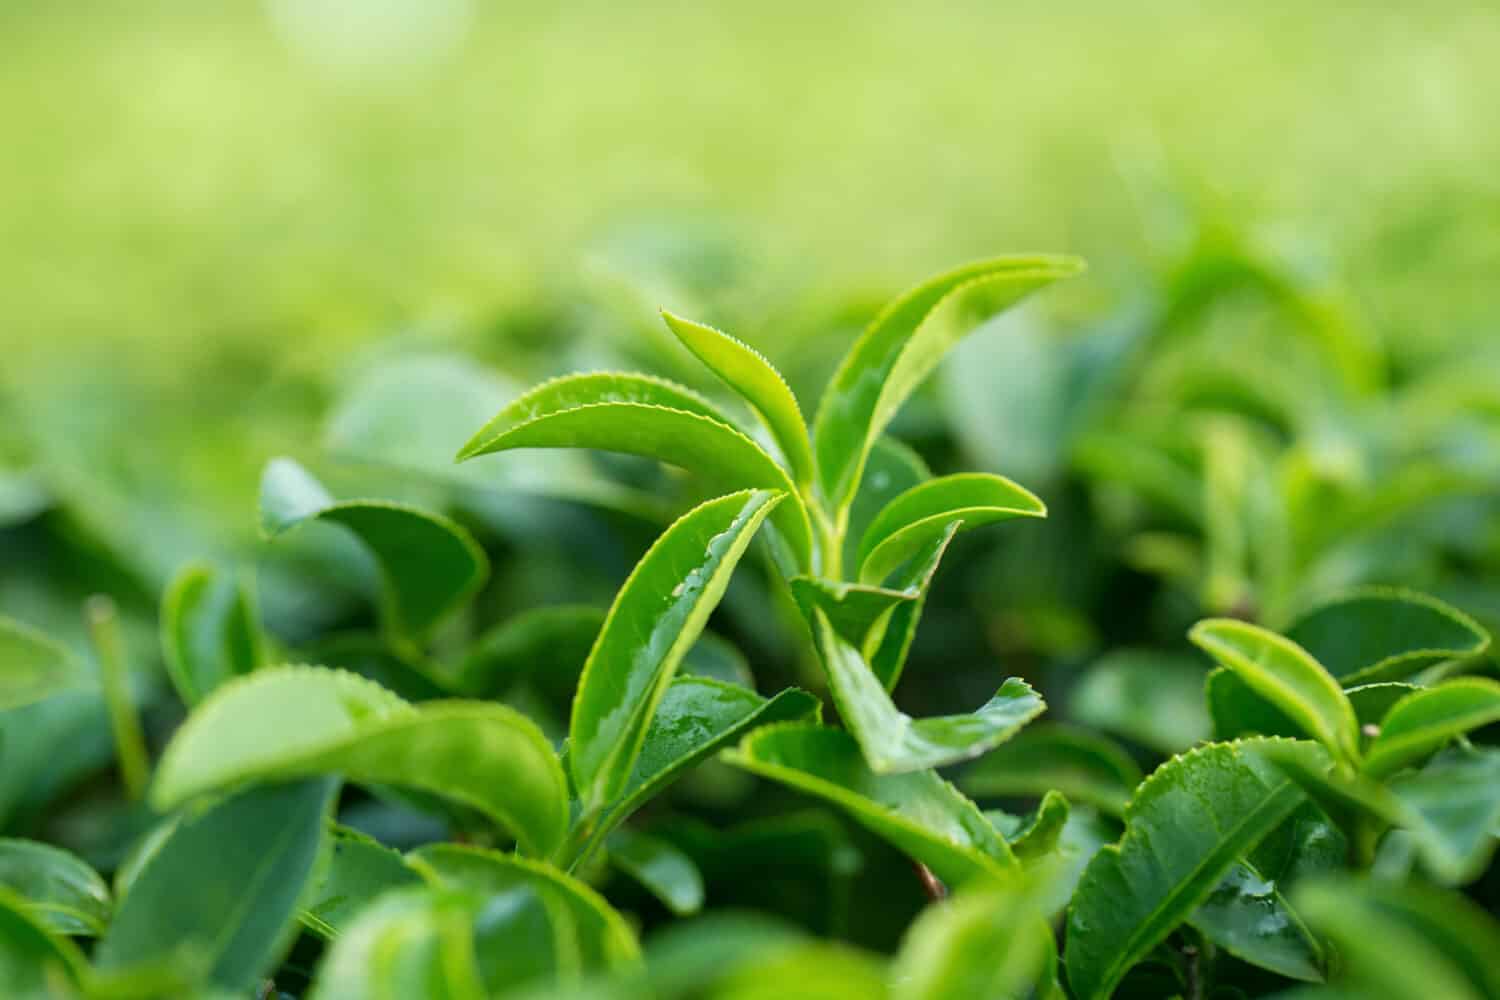 Closeup, Top of Green tea leaf in the morning, tea plantation, blurred background.